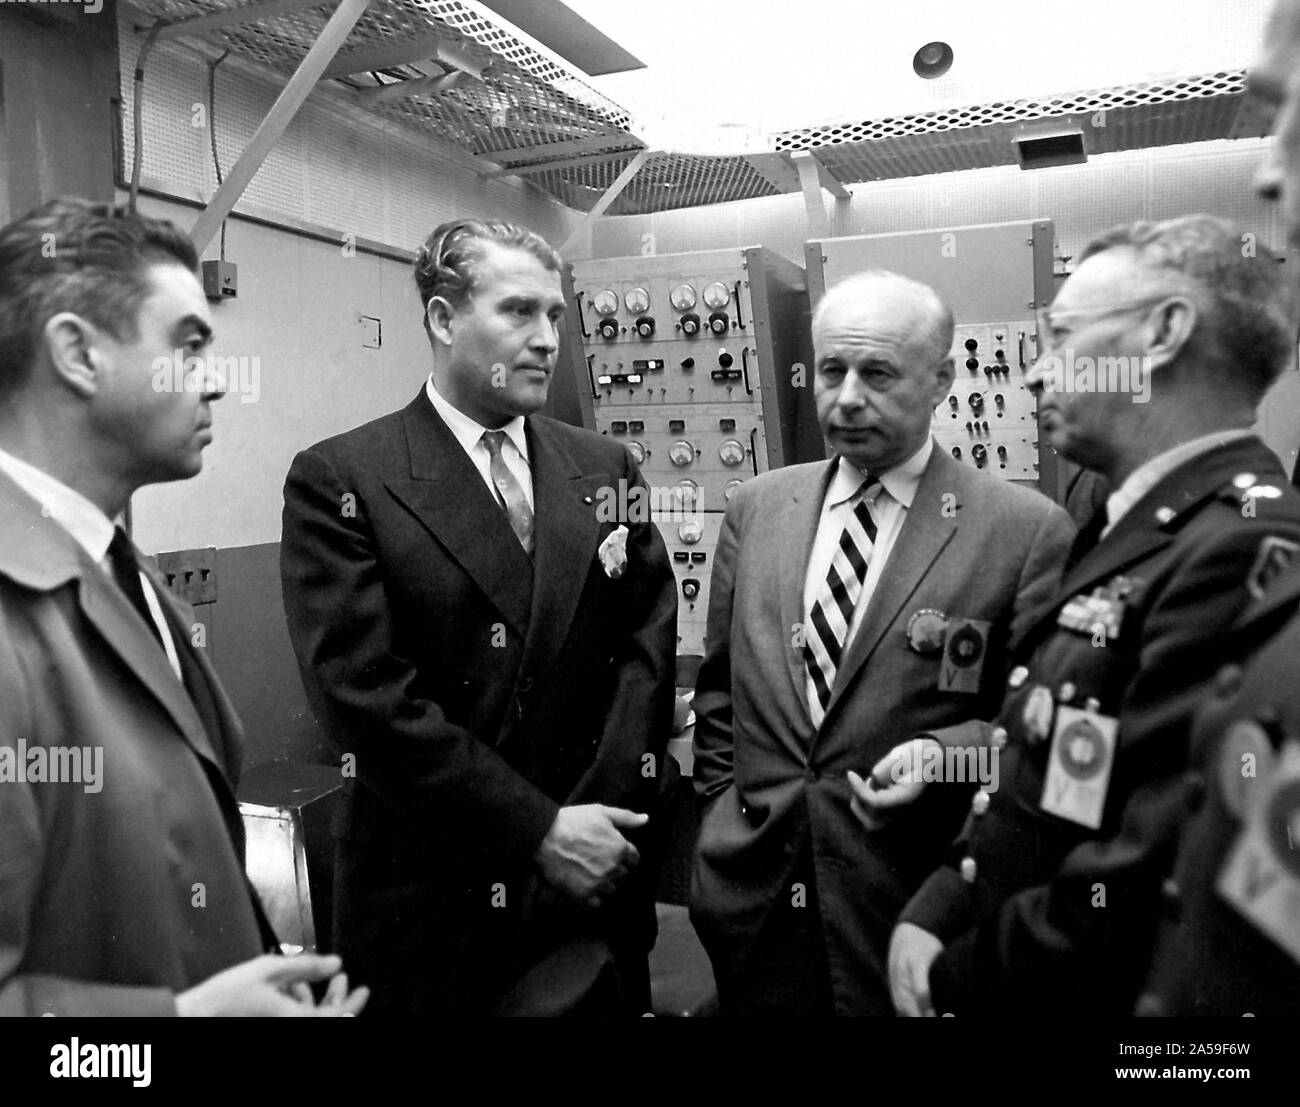 In this 1959 photo, taken at Cape Canaveral, Florida, Dr. von Braun (2nd from left) Director of the U.S. Army Ballistic Missile Agency's (ABMA) Development Operations Division, is shown conferring with Air Force Major General Donald R. Ostrander (left), on assignment at NASA as launch vehicle director; Dr. Eberhard Rees, deputy to Dr. von Braun, and Army Brigadier General John Barclay, commander of the ABMA. Stock Photo